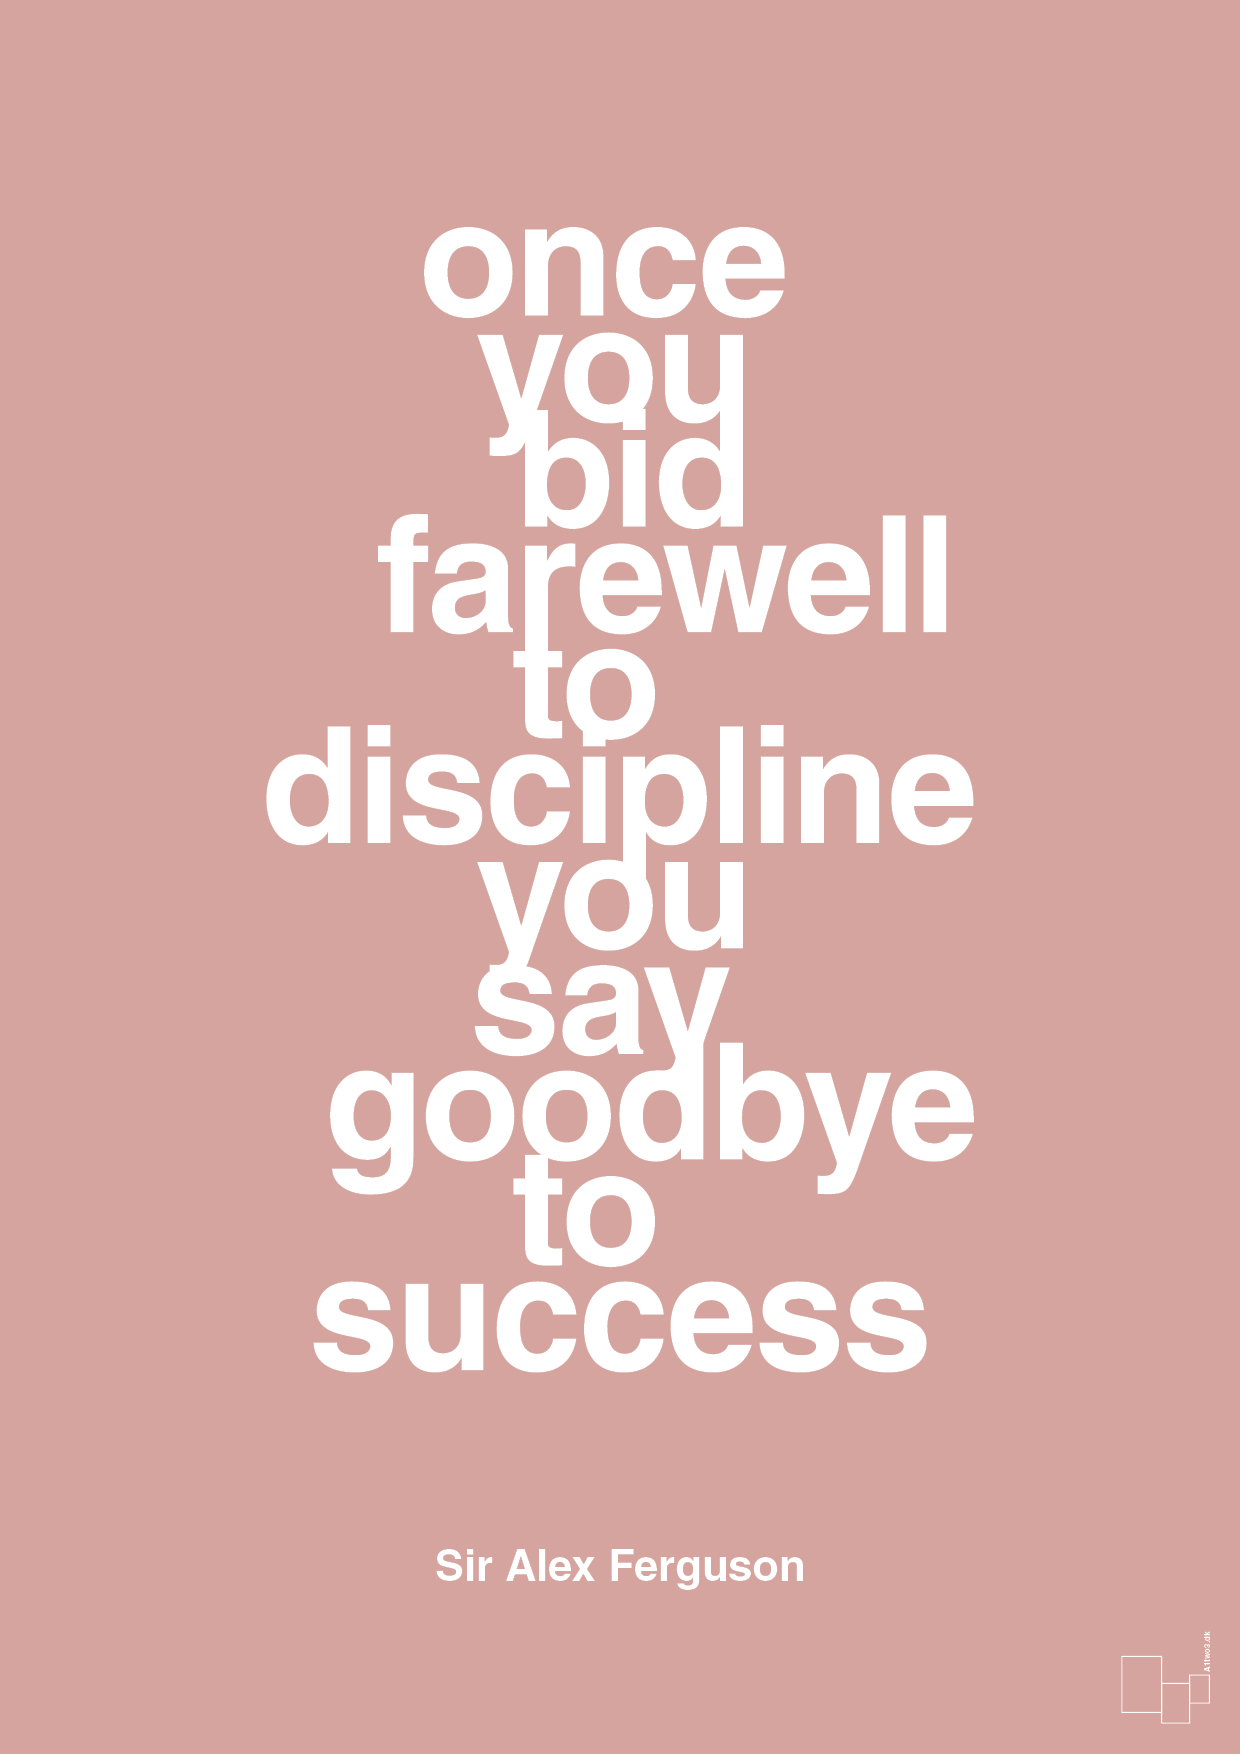 once you bid farewell to discipline you say goodbye to success - Plakat med Citater i Bubble Shell